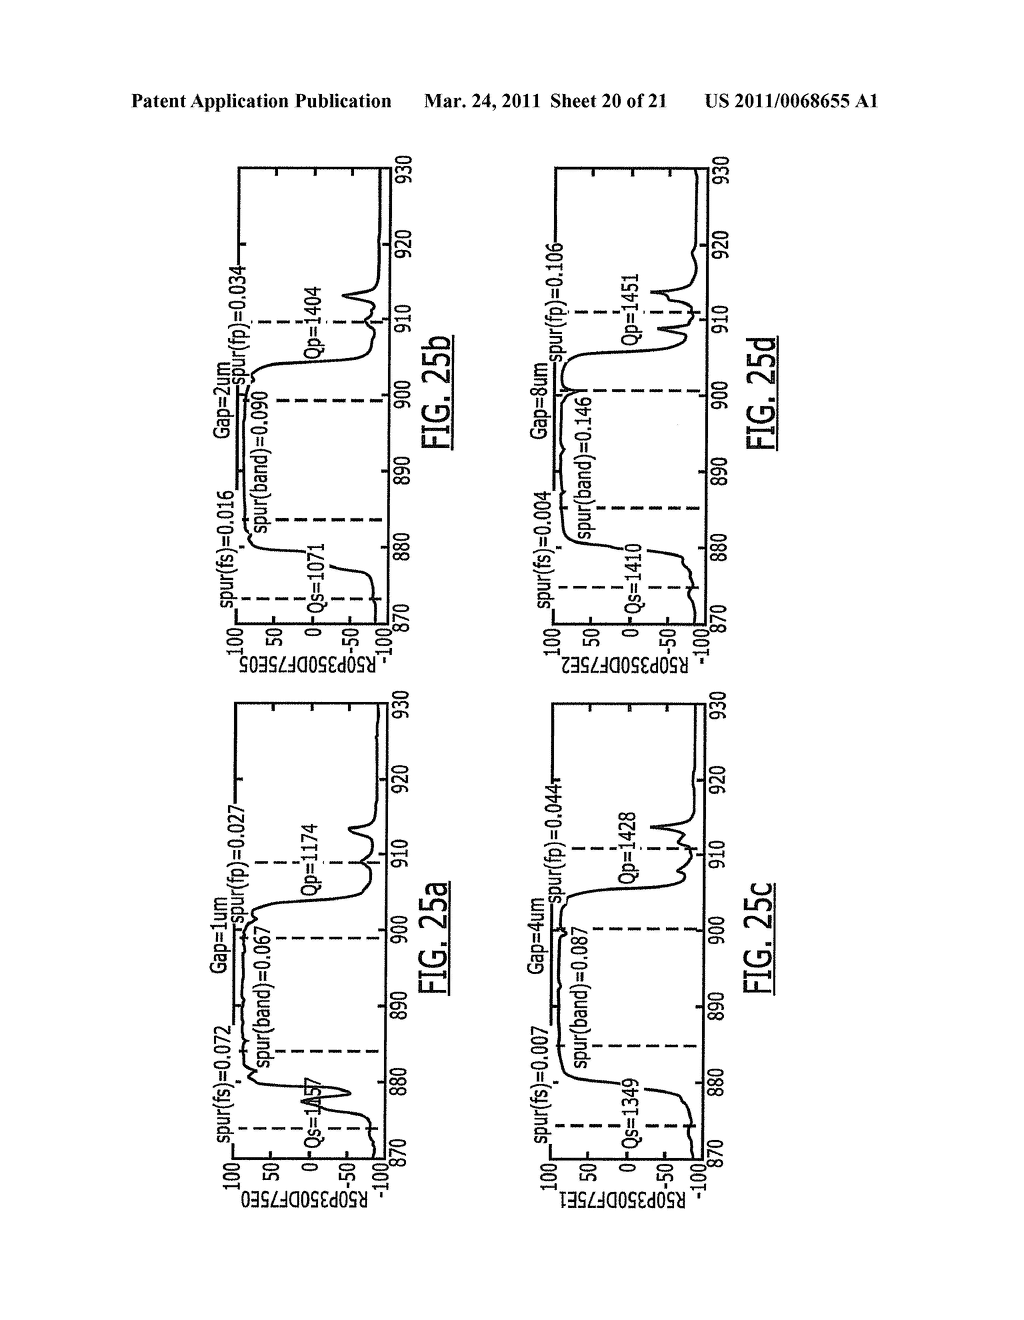 PISTON MODE ACOUSTIC WAVE DEVICE AND METHOD PROVIDING A HIGH COUPLING FACTOR - diagram, schematic, and image 21